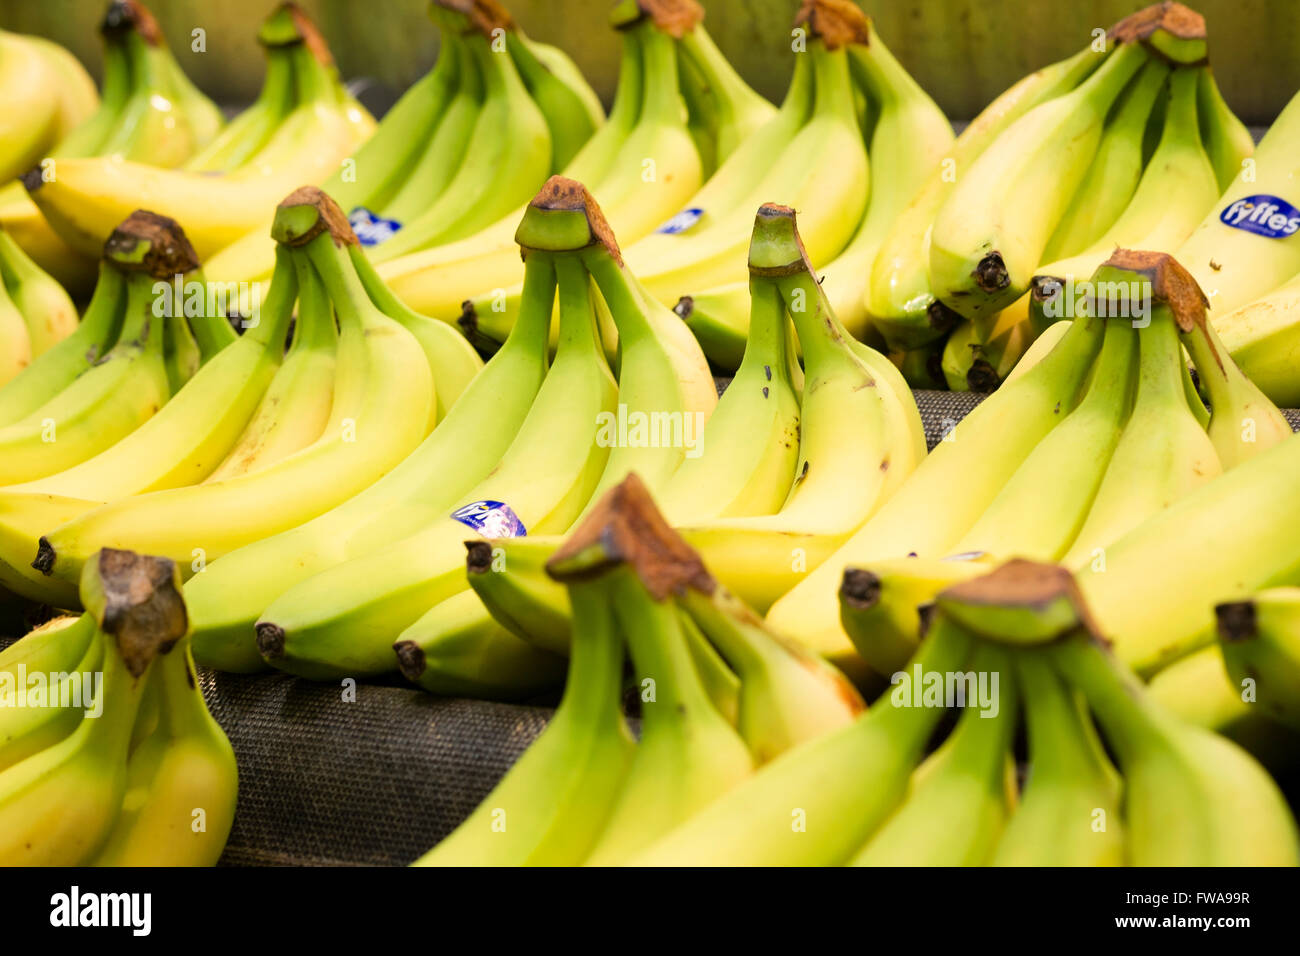 Bunches of Fyffes bananas for sale, UK. Stock Photo